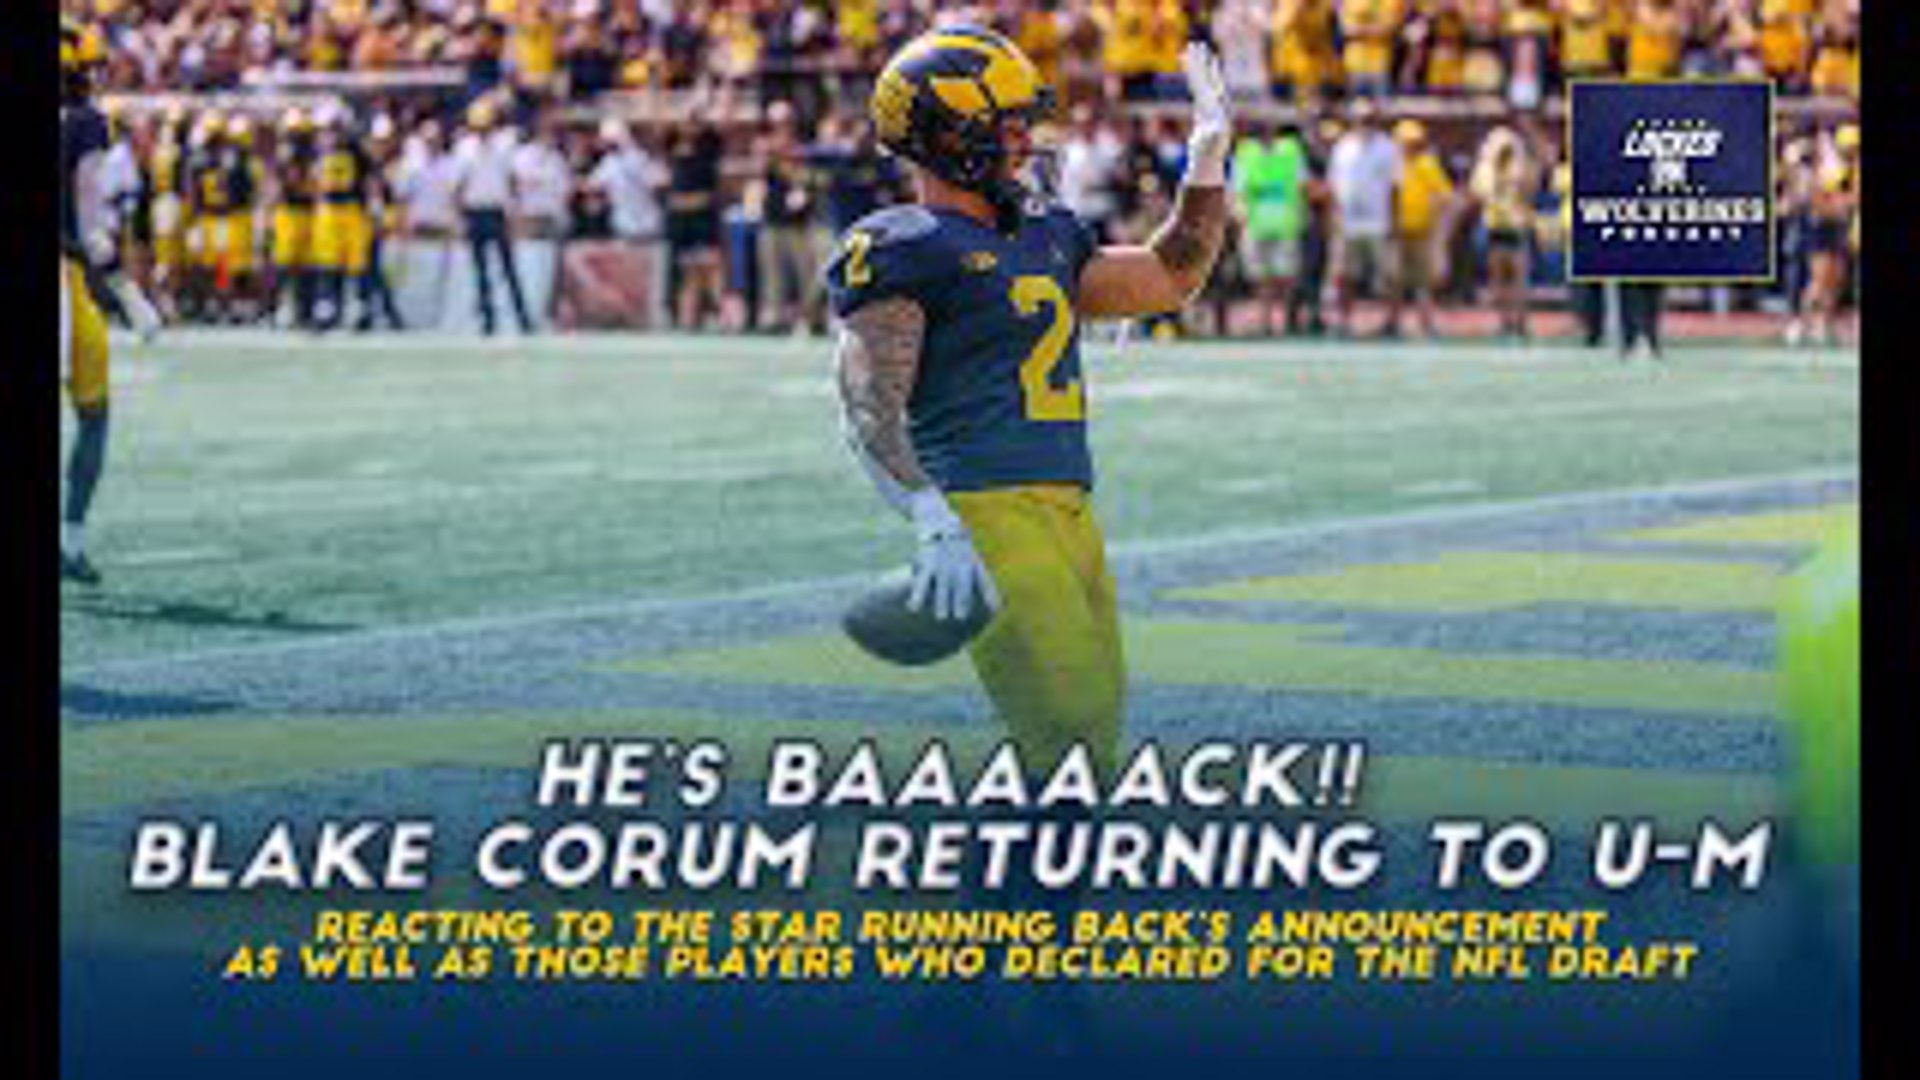 Michigan football got something better than a recruiting win on Monday with Blake Corum announcing that he will be returning for his senior year at U-M in 2023.